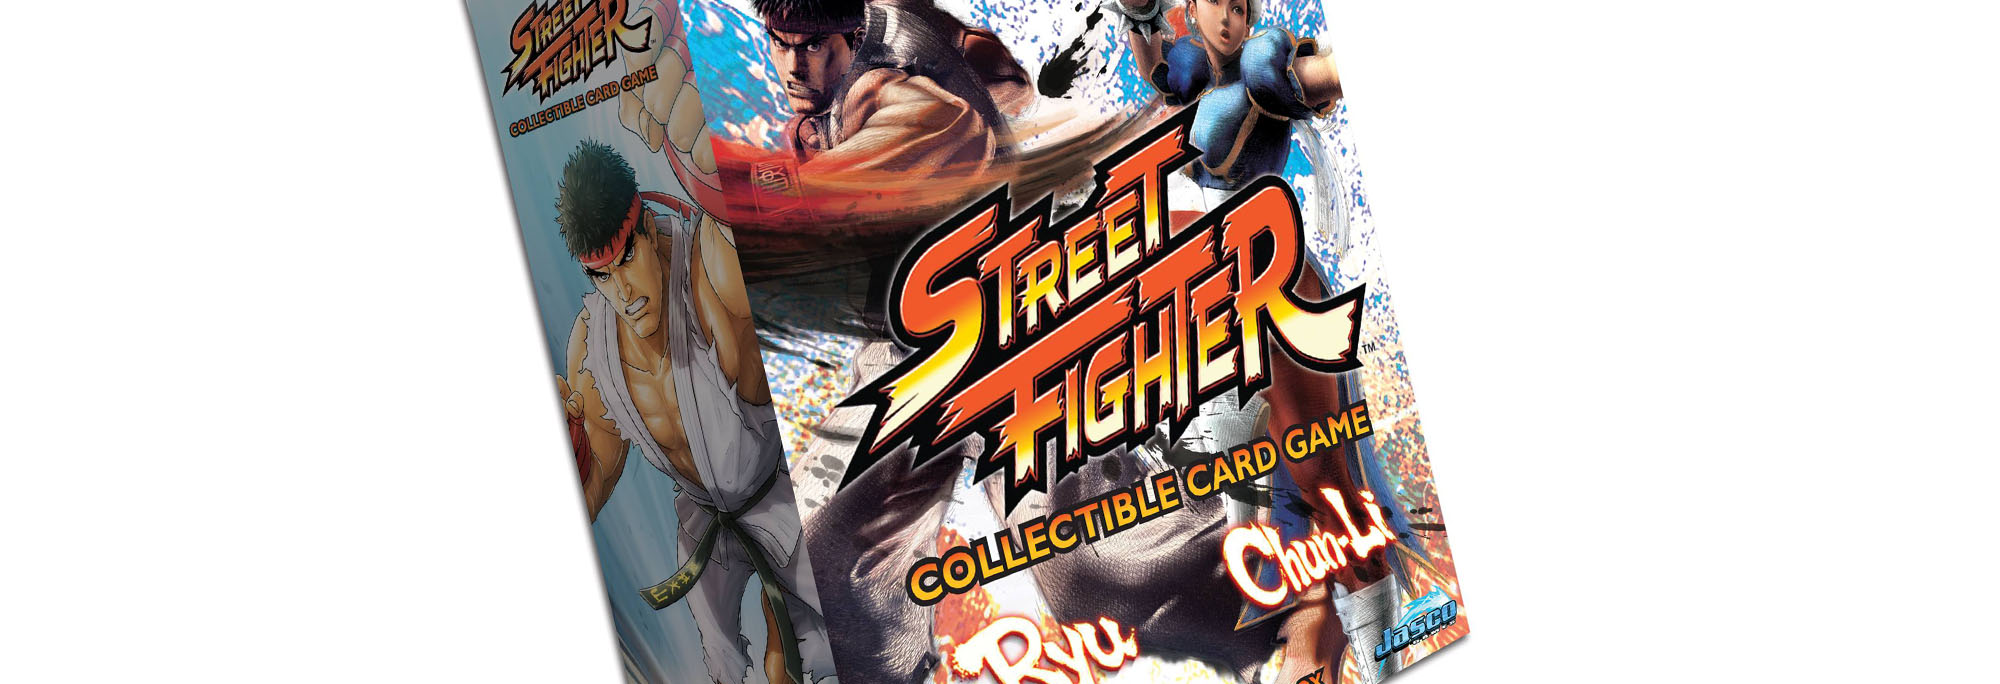 Street Fighter Collectable Card Game